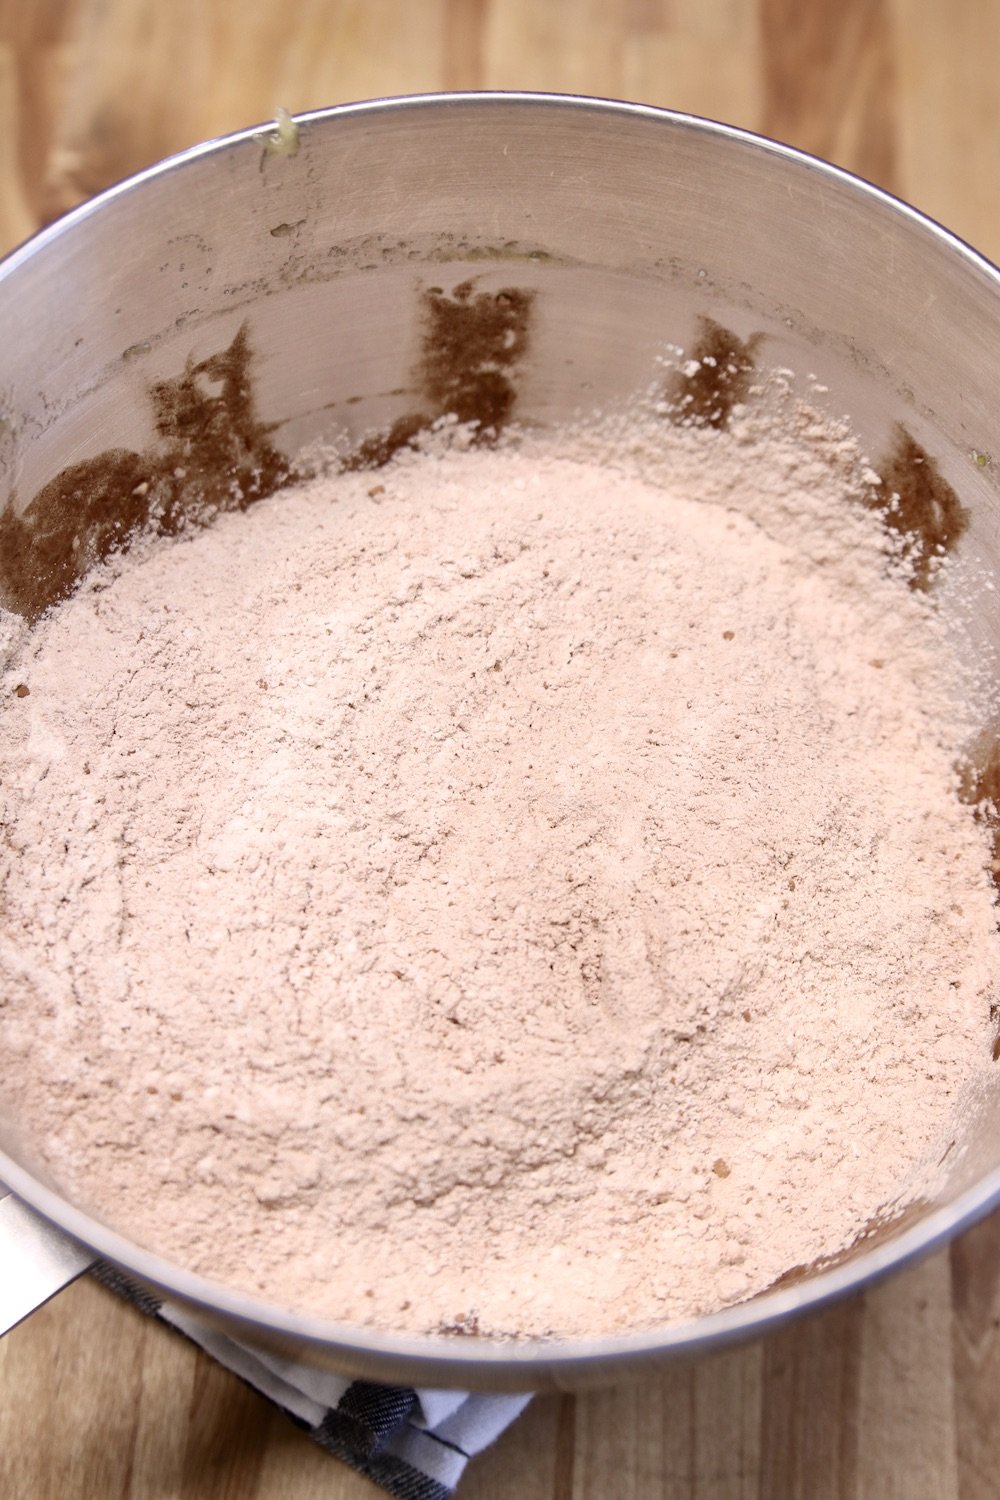 Dry ingredients added to banana bread batter in a mixing bowl